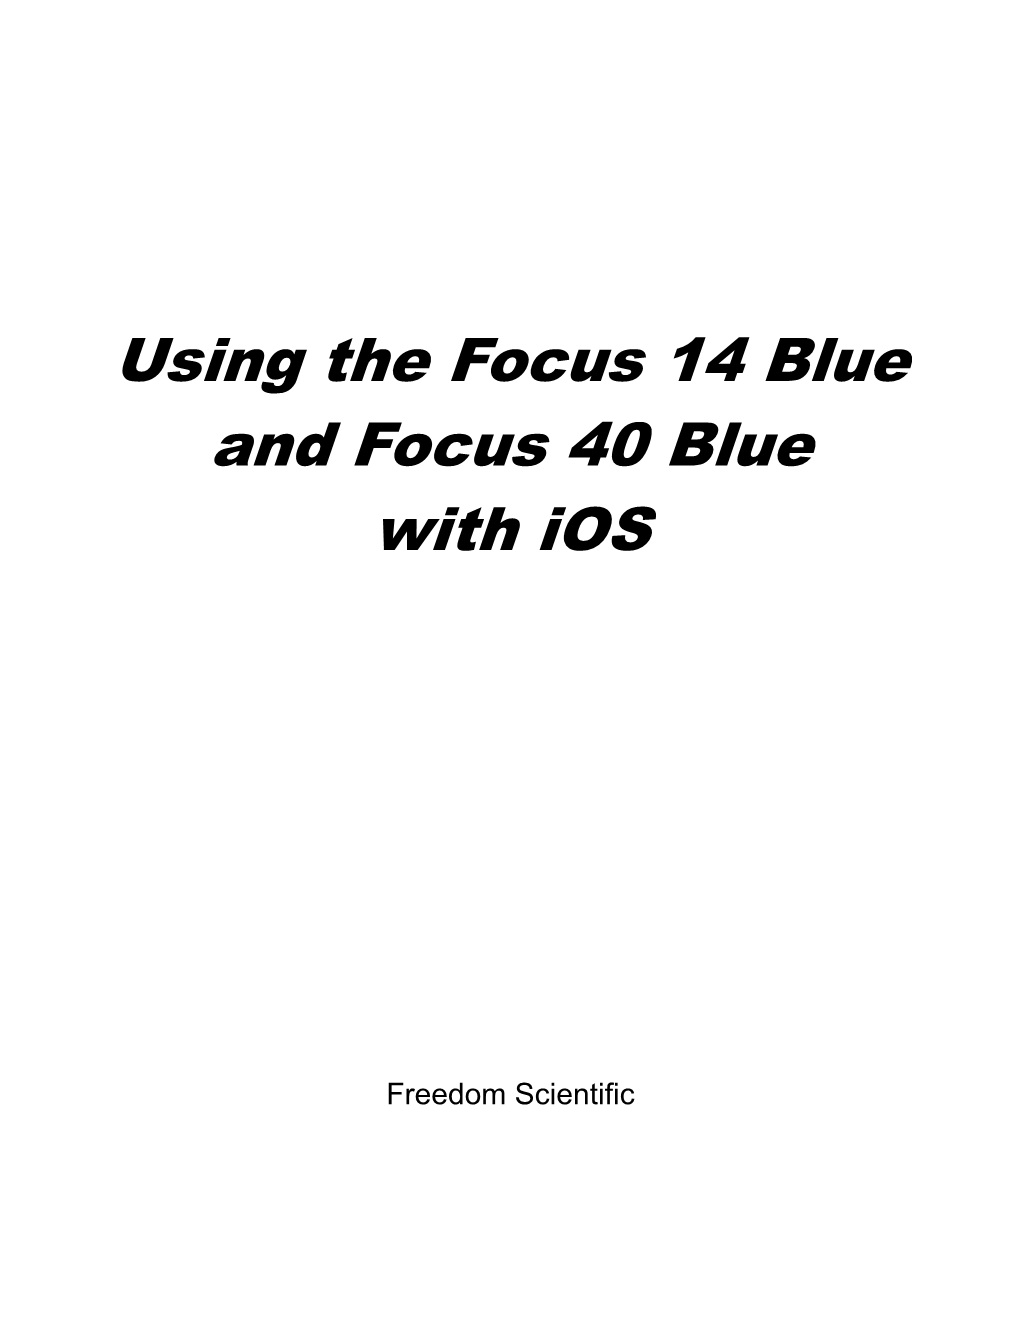 Using the Focus 14 Blue and Focus 40 Blue with Ios